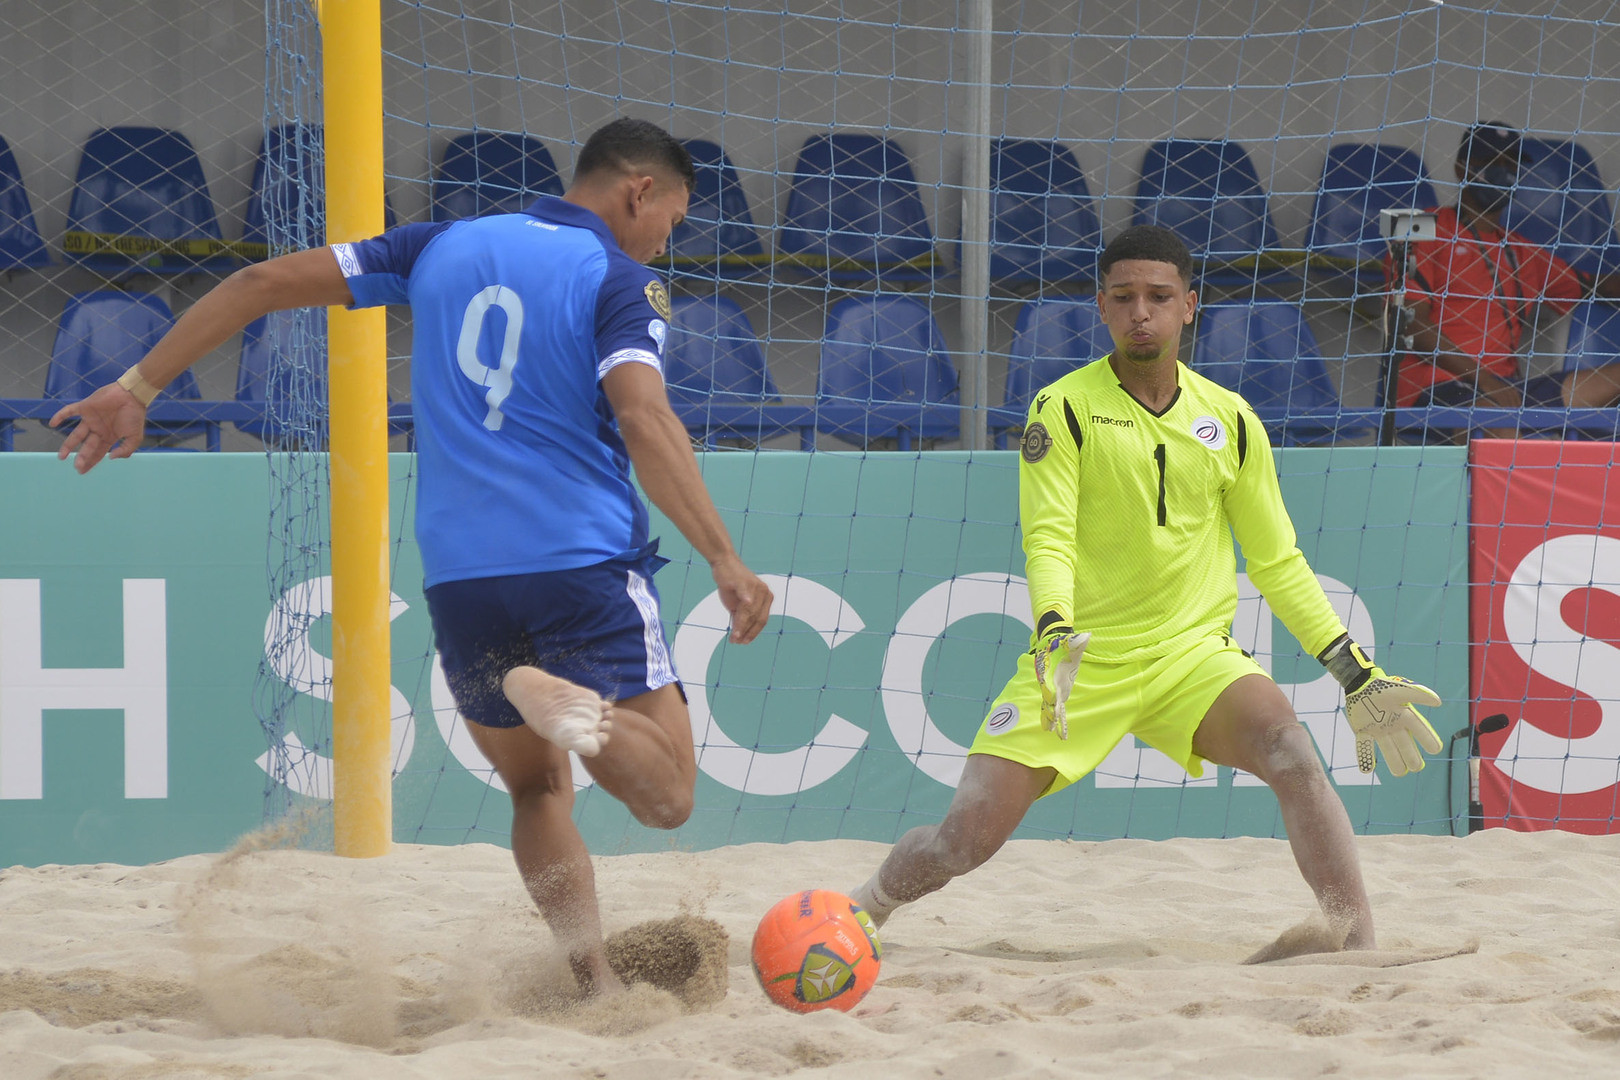 Champions Mexico start strong at CONCACAF Beach Soccer Championship as Dominican Republic show COVID positives